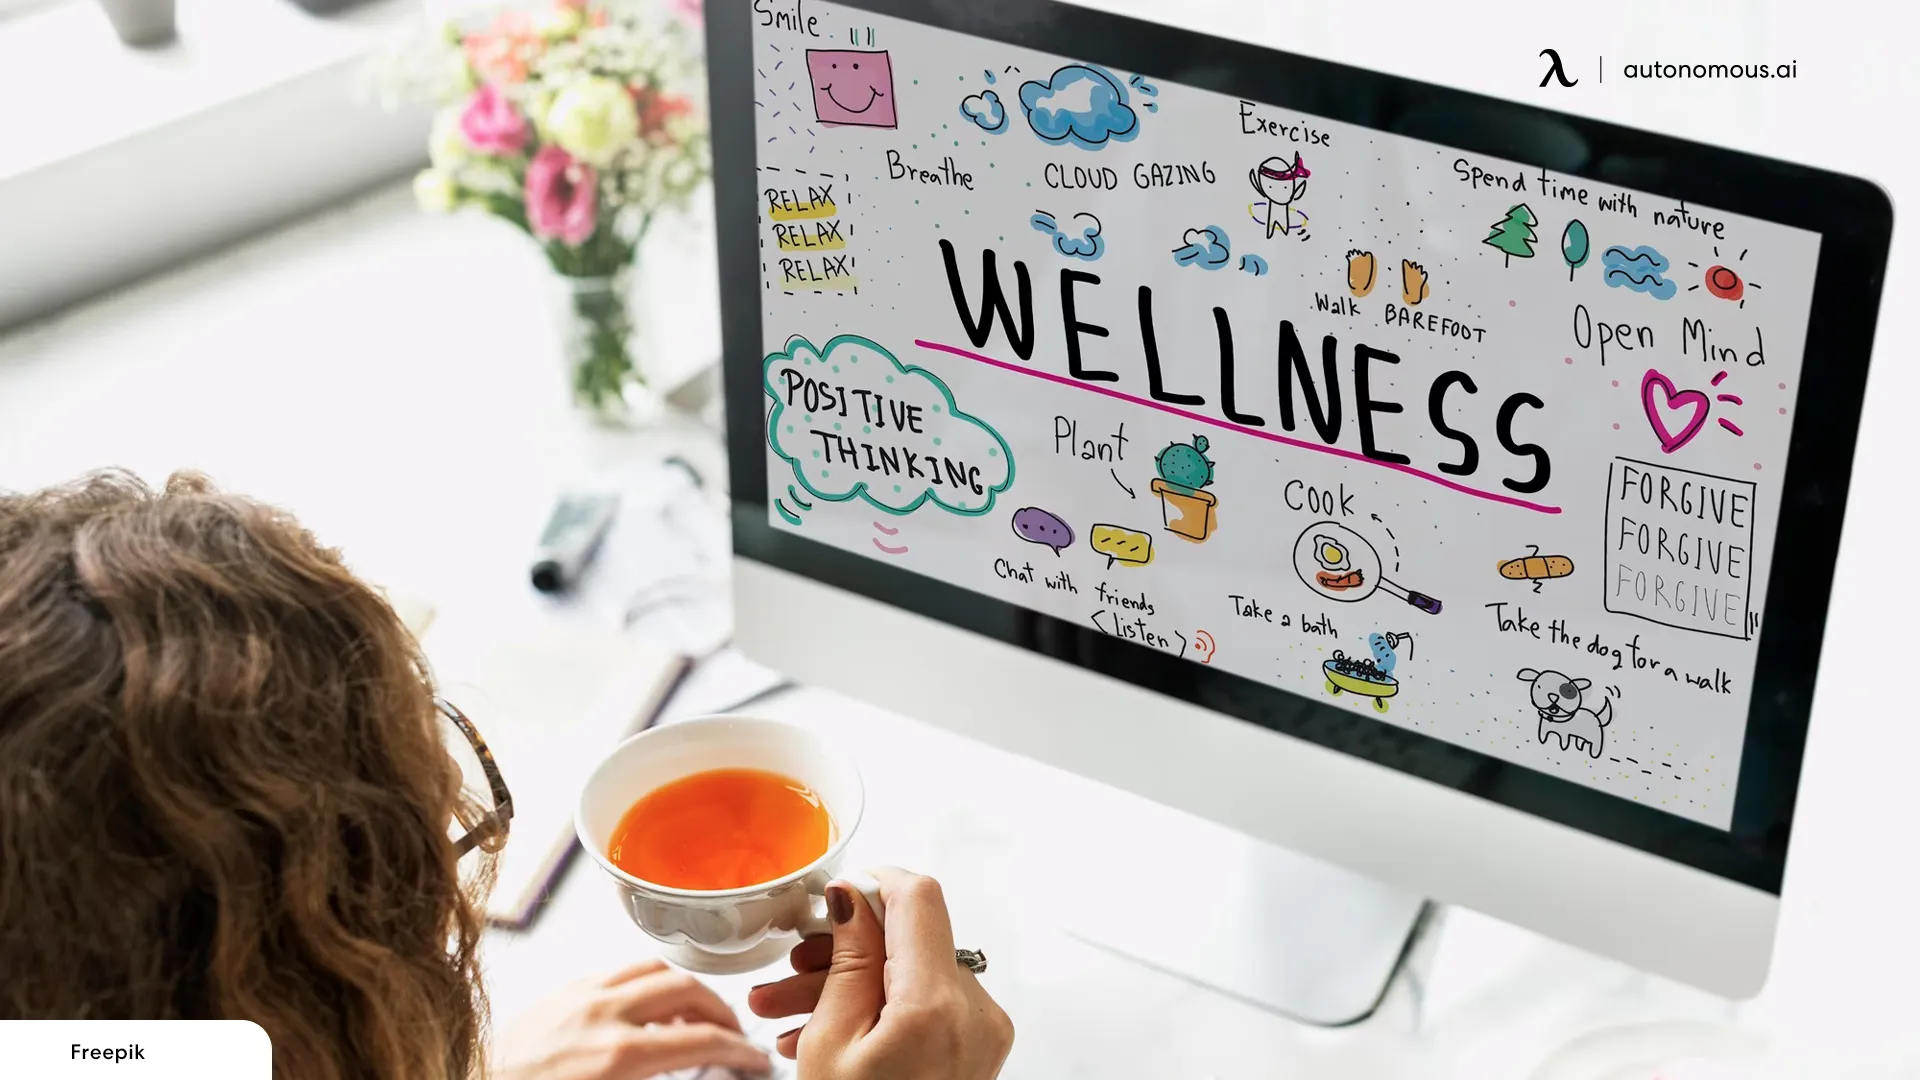 Why Do Organizations Offer Well-being Benefits?